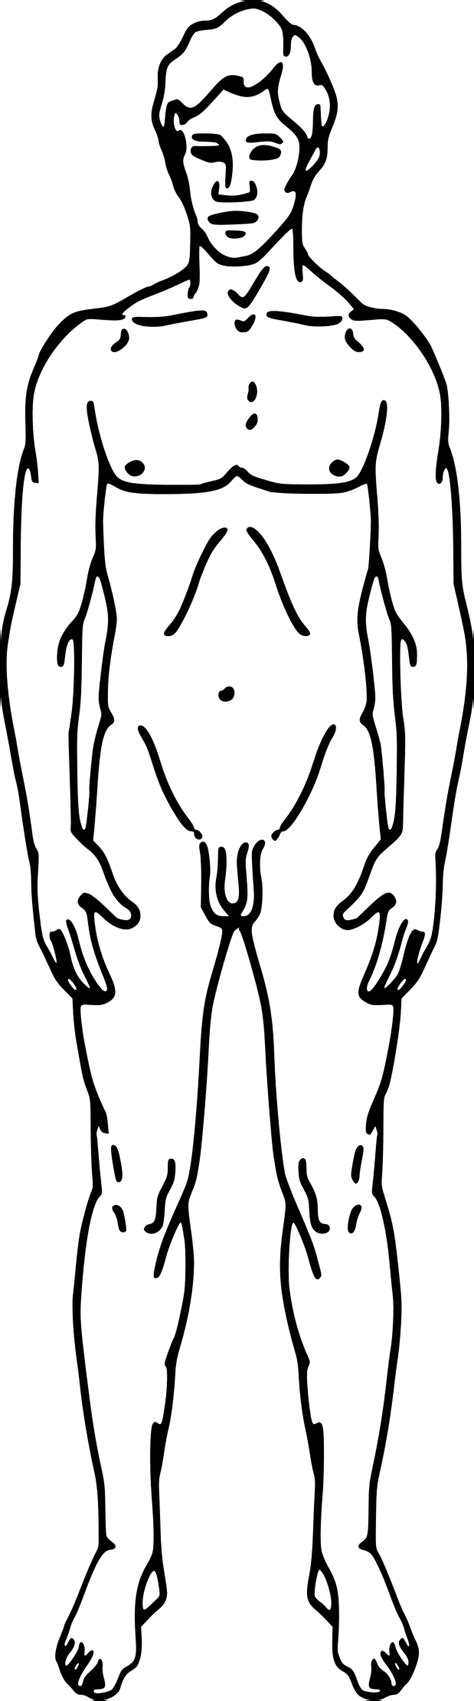 The part appears to be floating because all the supports and contacts with other such a diagram of the body in which the body under consideration is freed from all the contact surfaces and shows all the forces acting on it, is. File:Pioneer plaque man as diagram template.svg ...